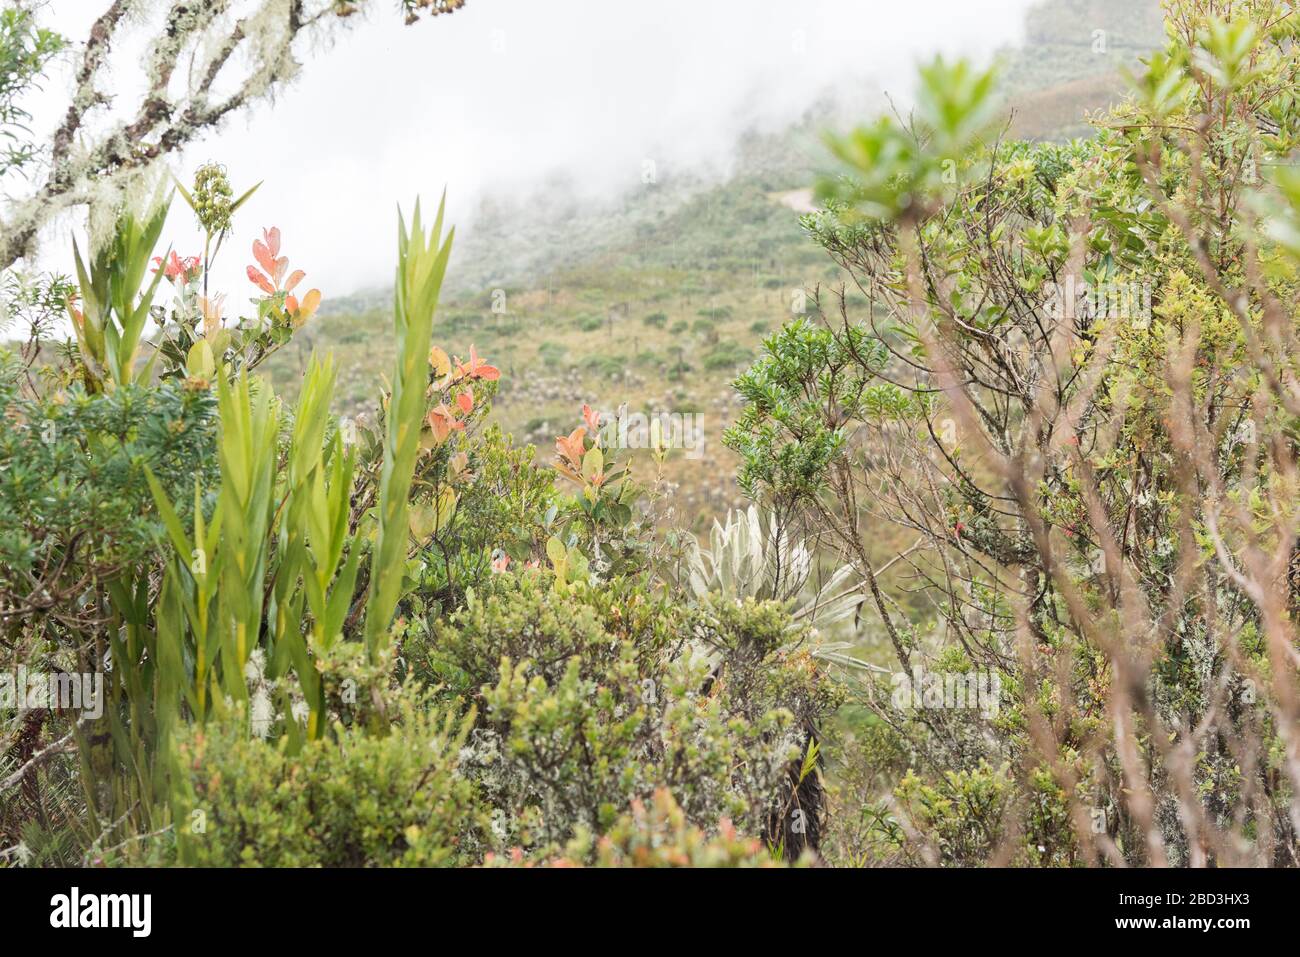 Chingaza National Natural Park, Colombia. Foggy landscape, moor in the rain, vegetation typical of the paramo, including frailejones, espeletia. Stock Photo